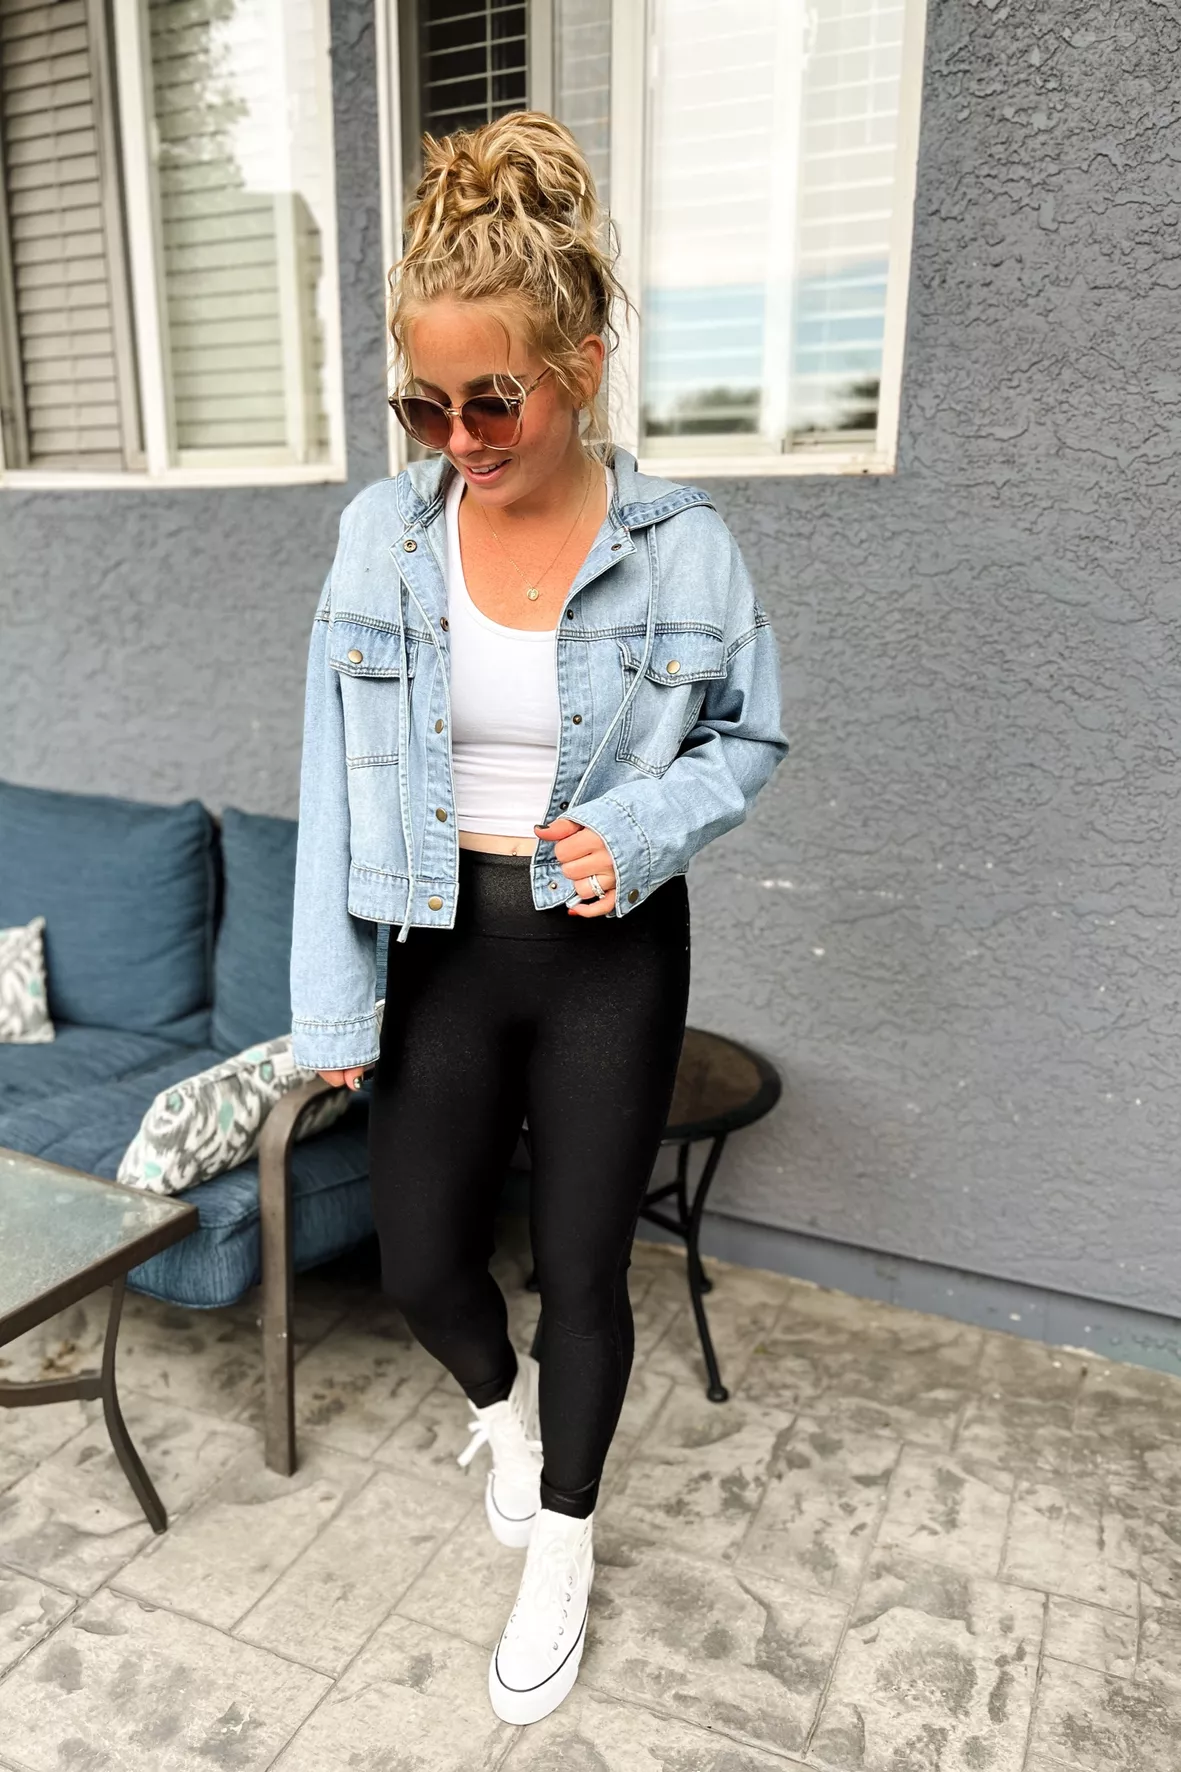 Black Leggings with White Shirt Outfits (23 ideas & outfits